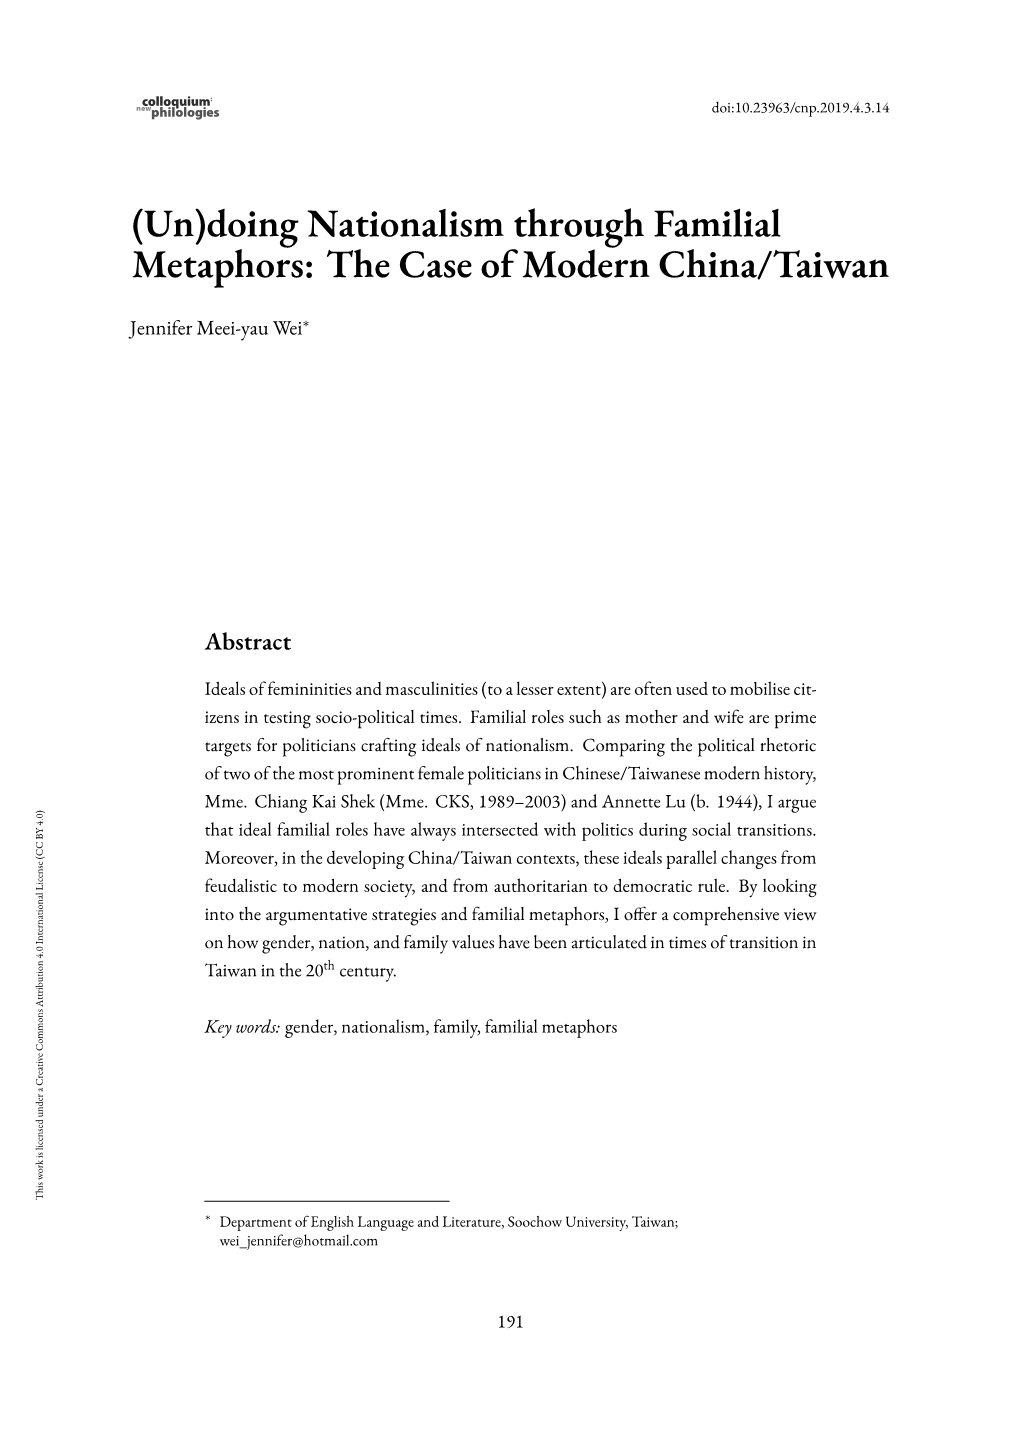 Doing Nationalism Through Familial Metaphors: the Case of Modern China/Taiwan